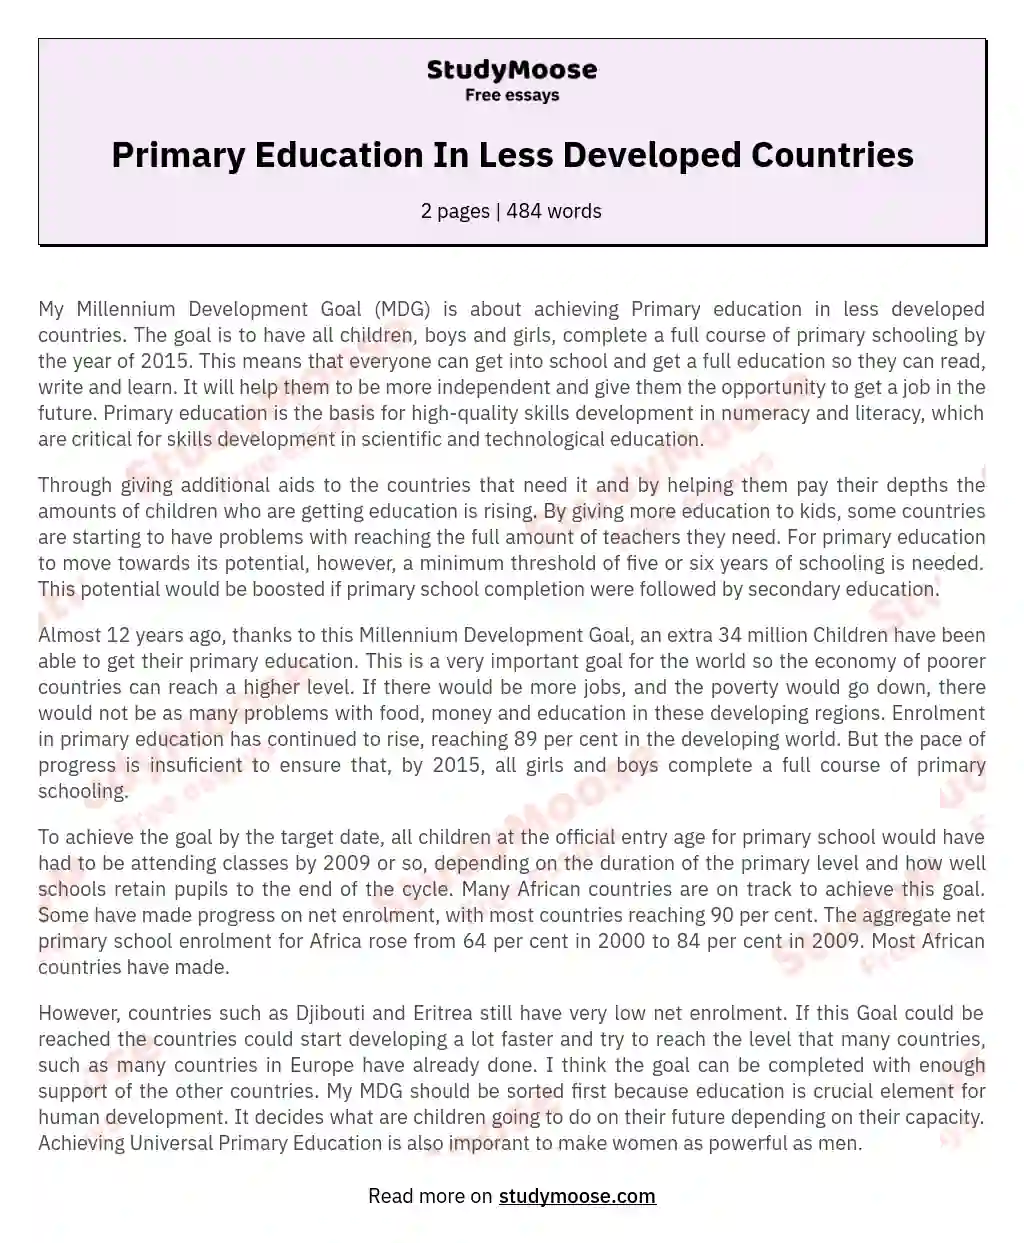 Primary Education In Less Developed Countries